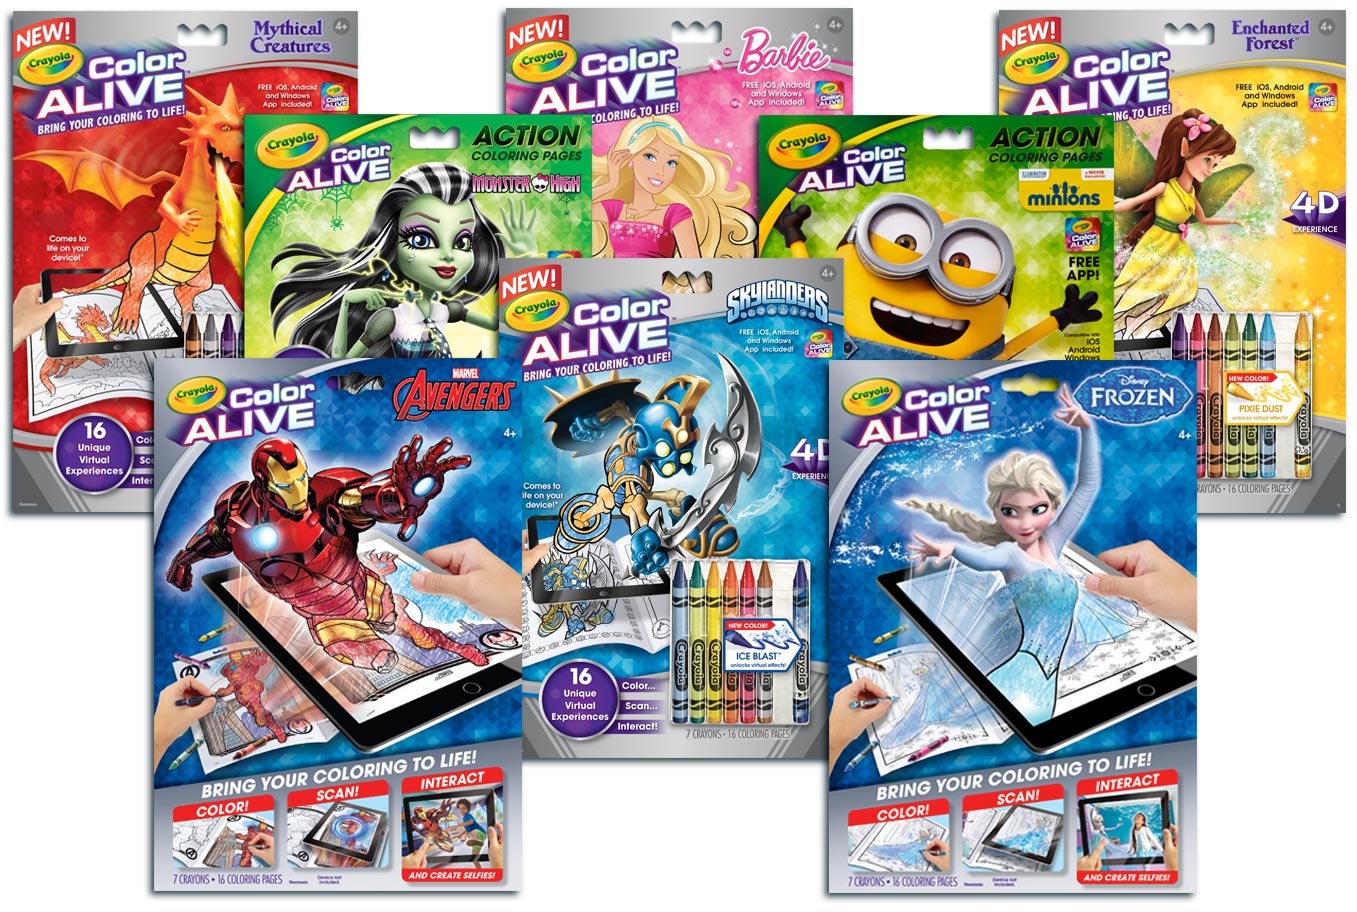 CRAYOLA COLOUR ALIVE MINIONS  MAGIC COLOURING PAGES WITH 7 CRAYONS X2 NEW FPP 